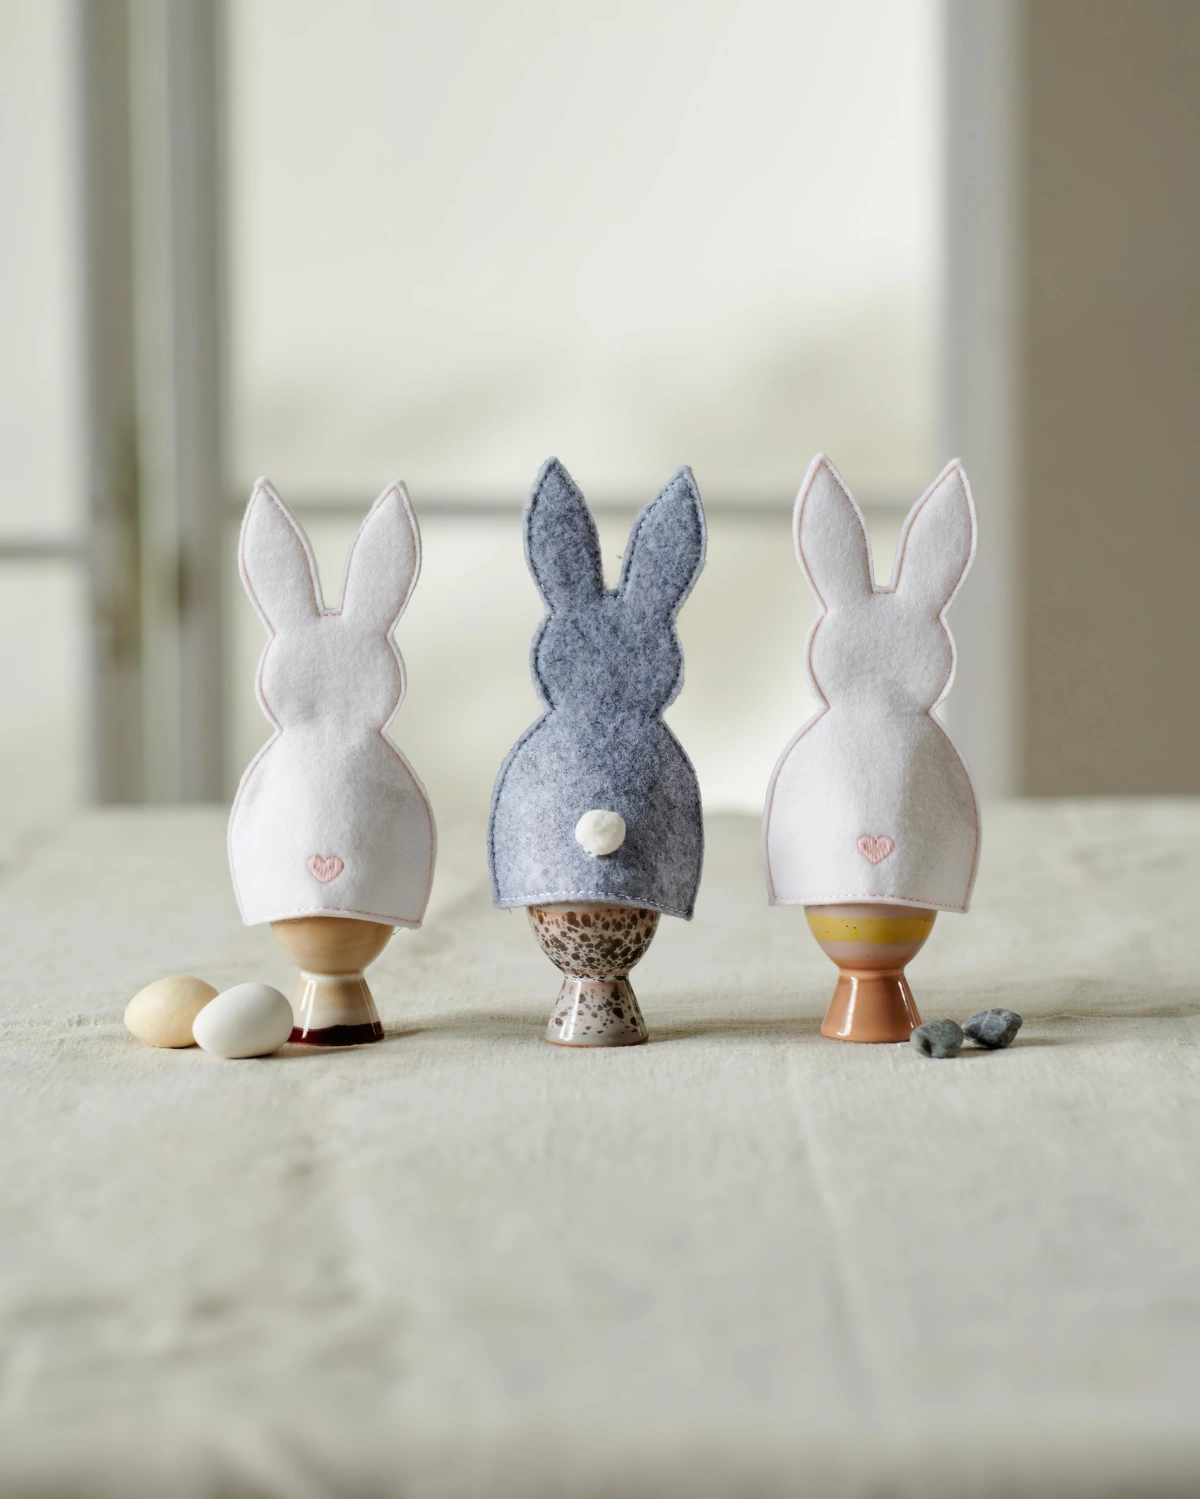 deco table paques support oeuf figurines lapin en feutre colore